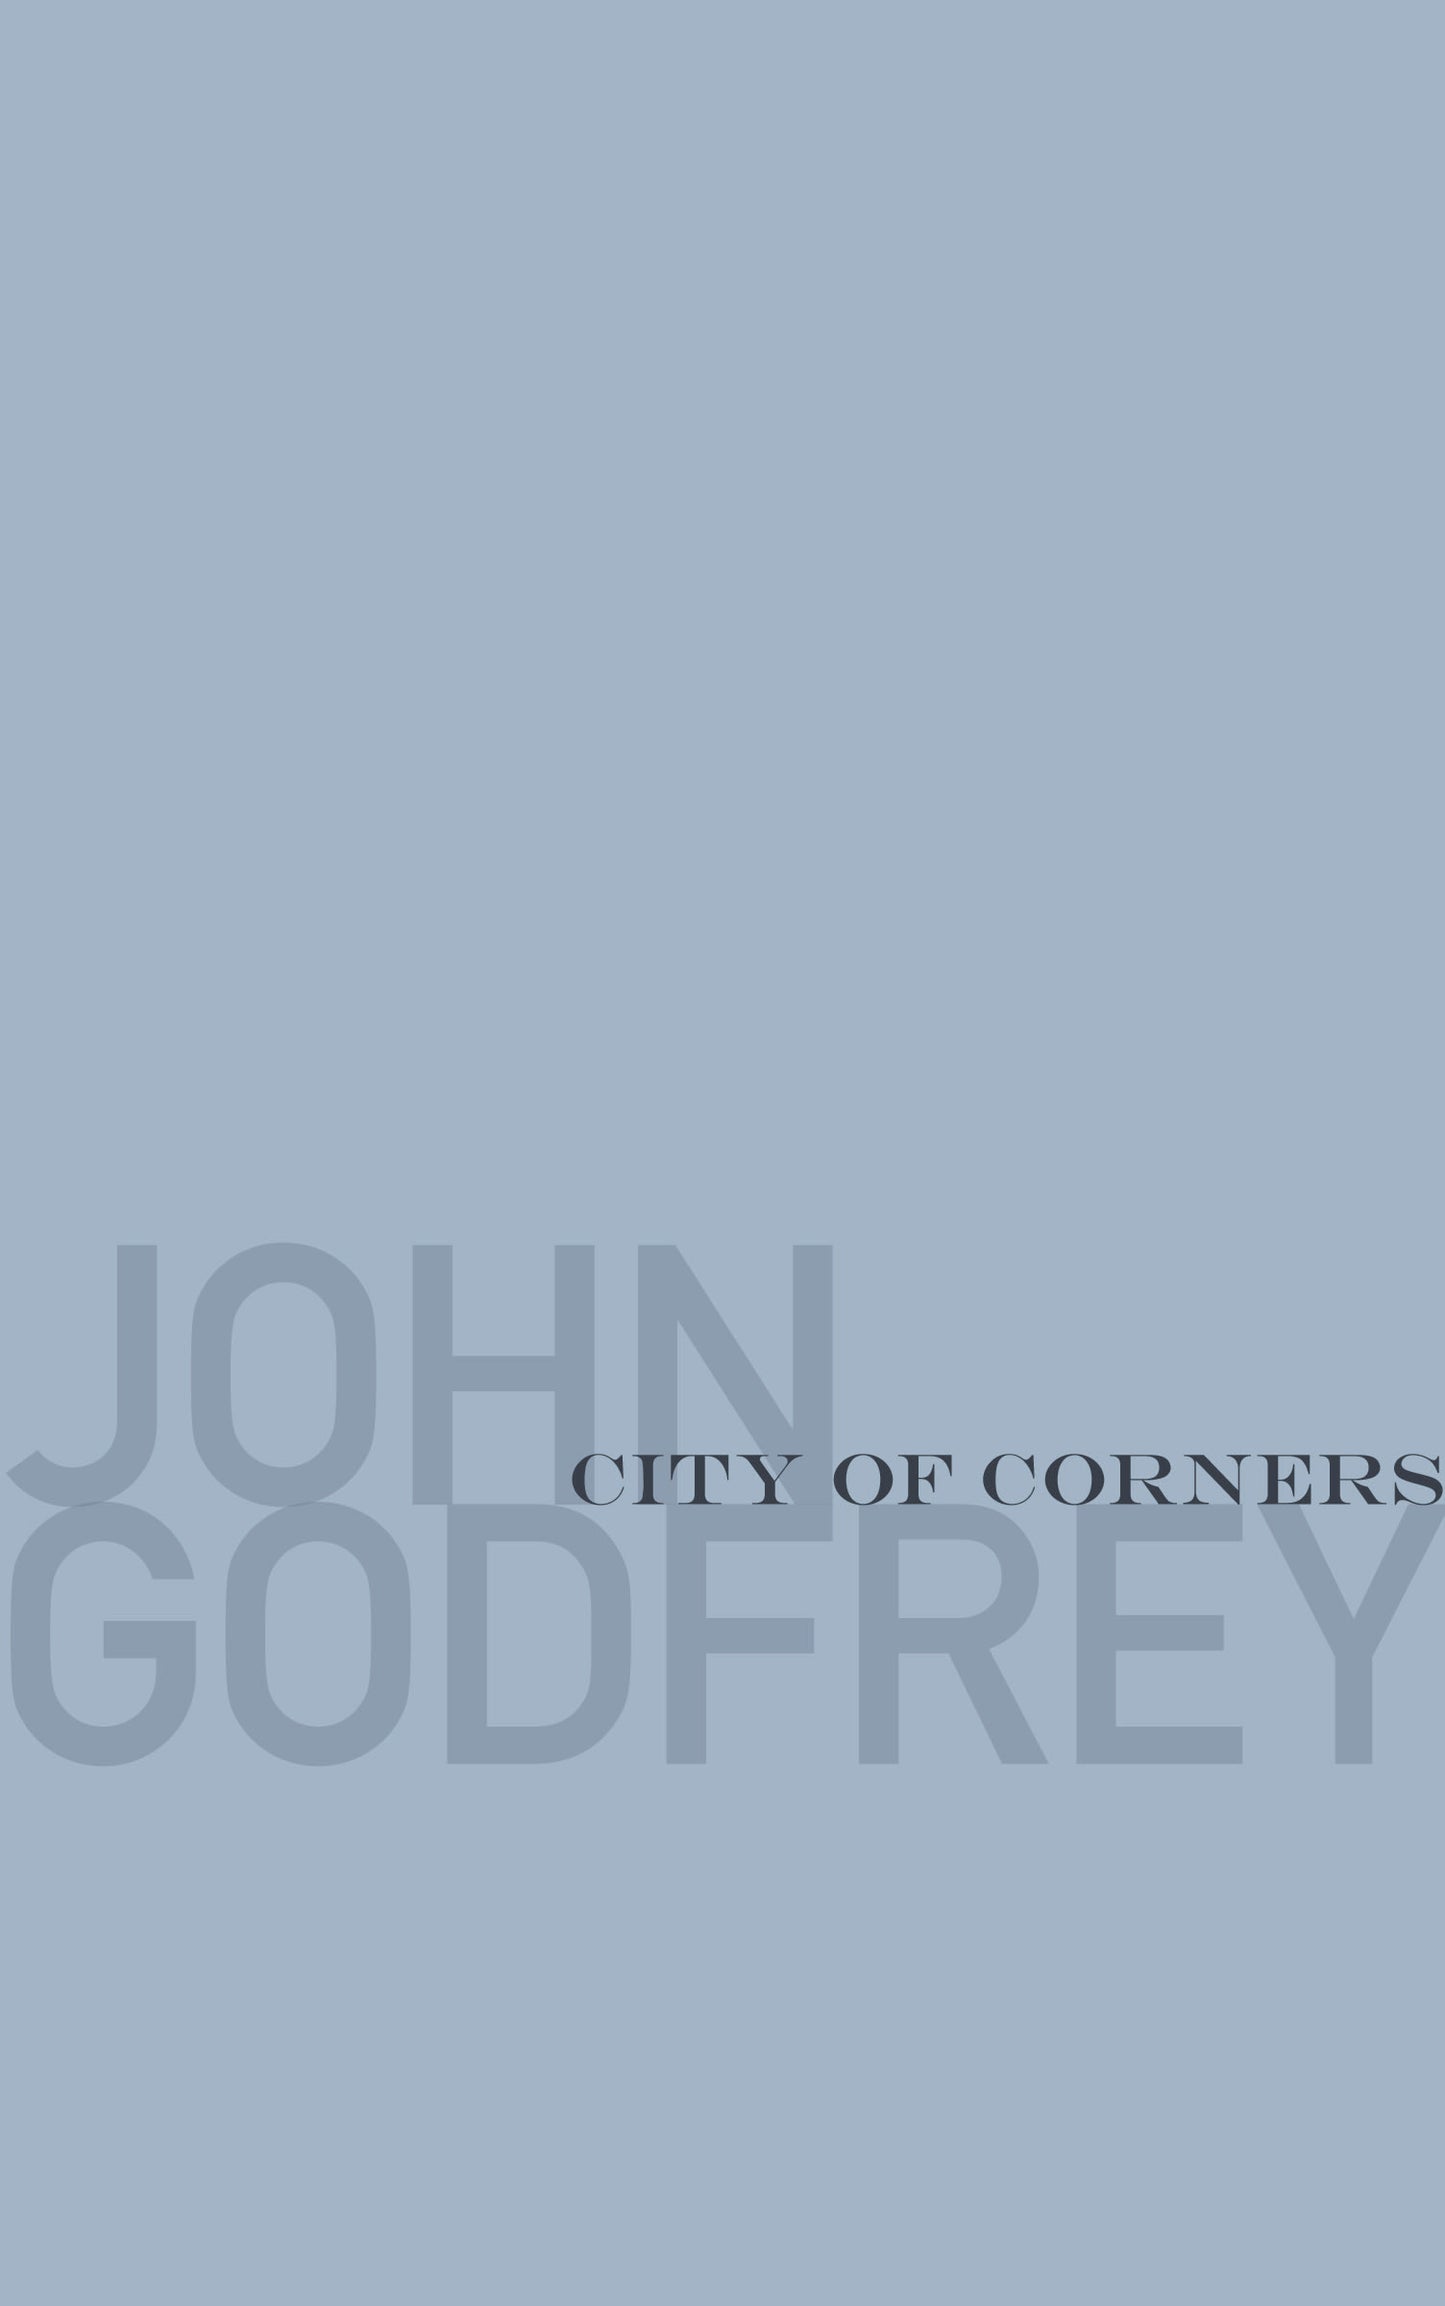 City of Corners - limited edition hardcover